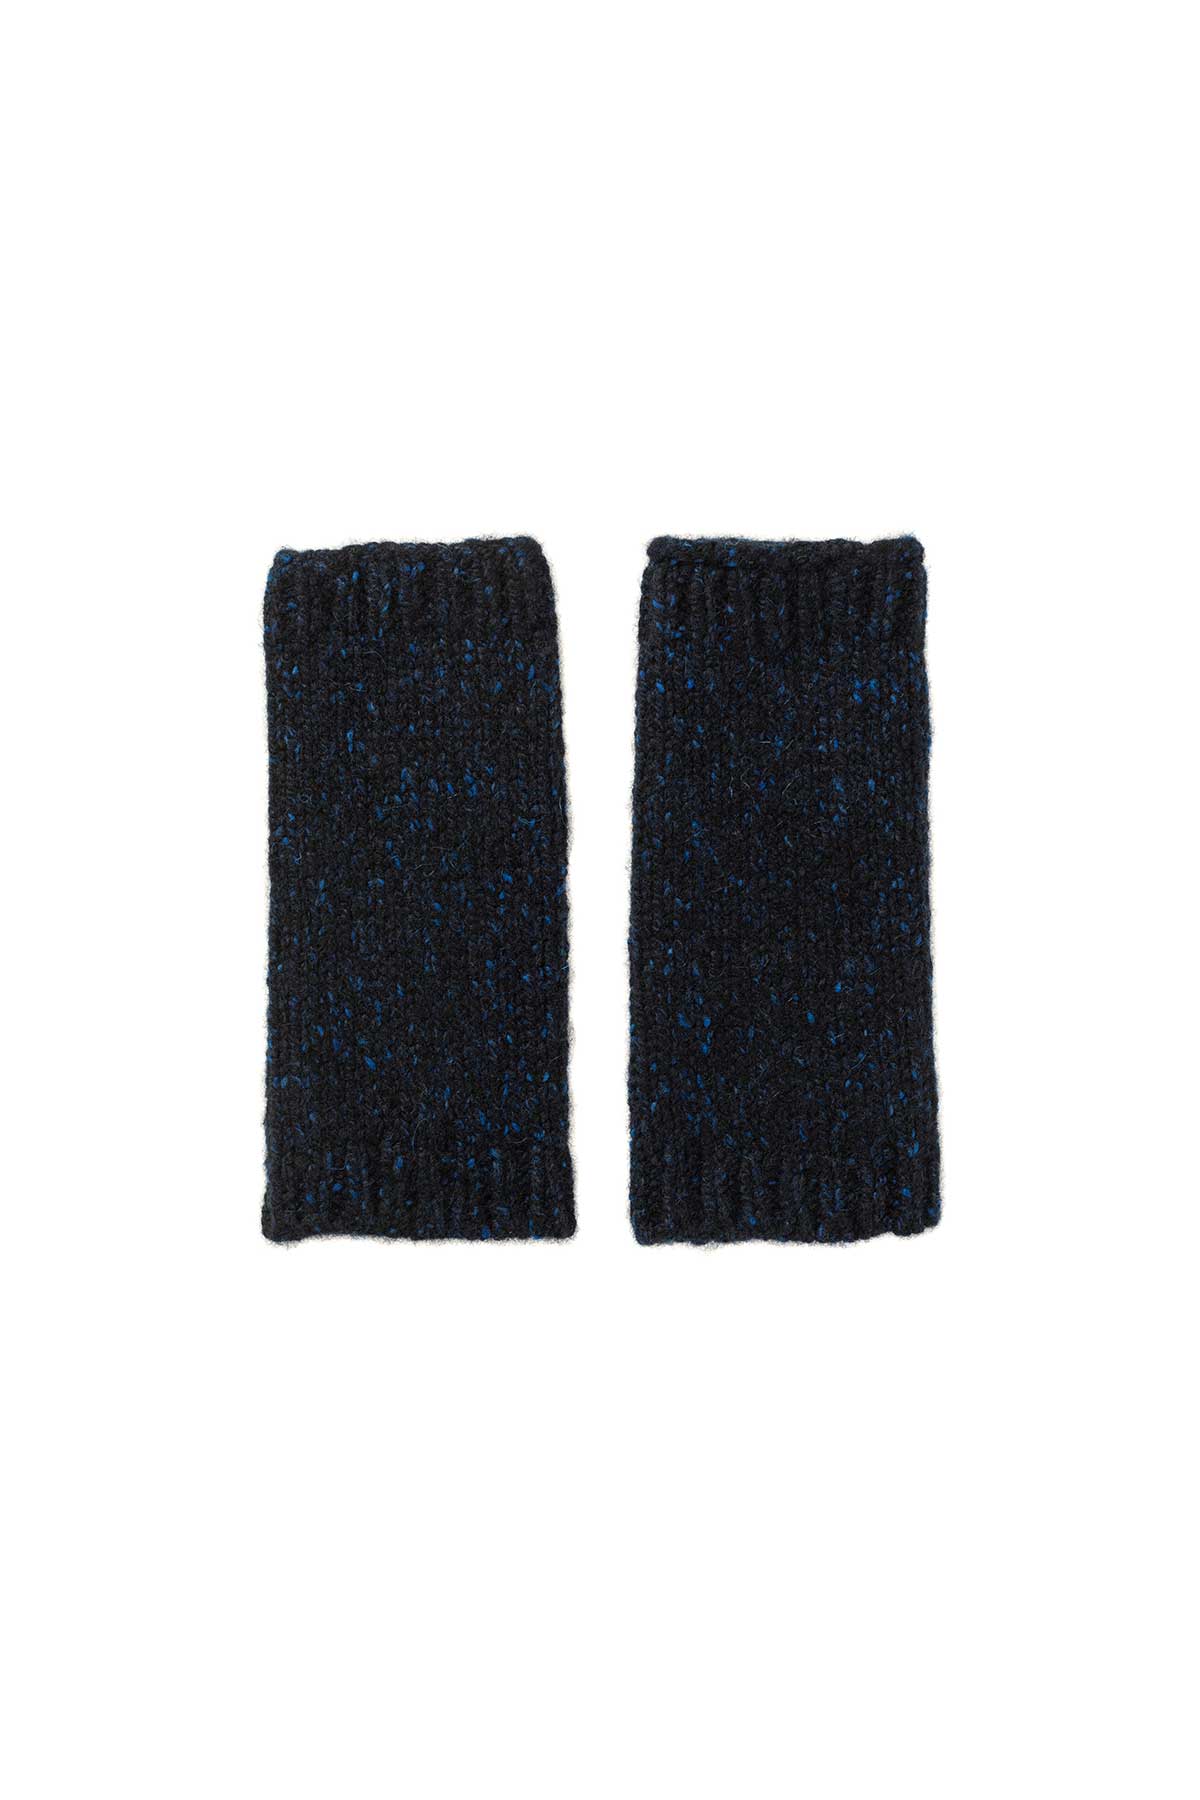 Johnstons of Elgin Donegal Cashmere Wrist Warmers in Dark Navy on a white background HAC03255HD7243ONE